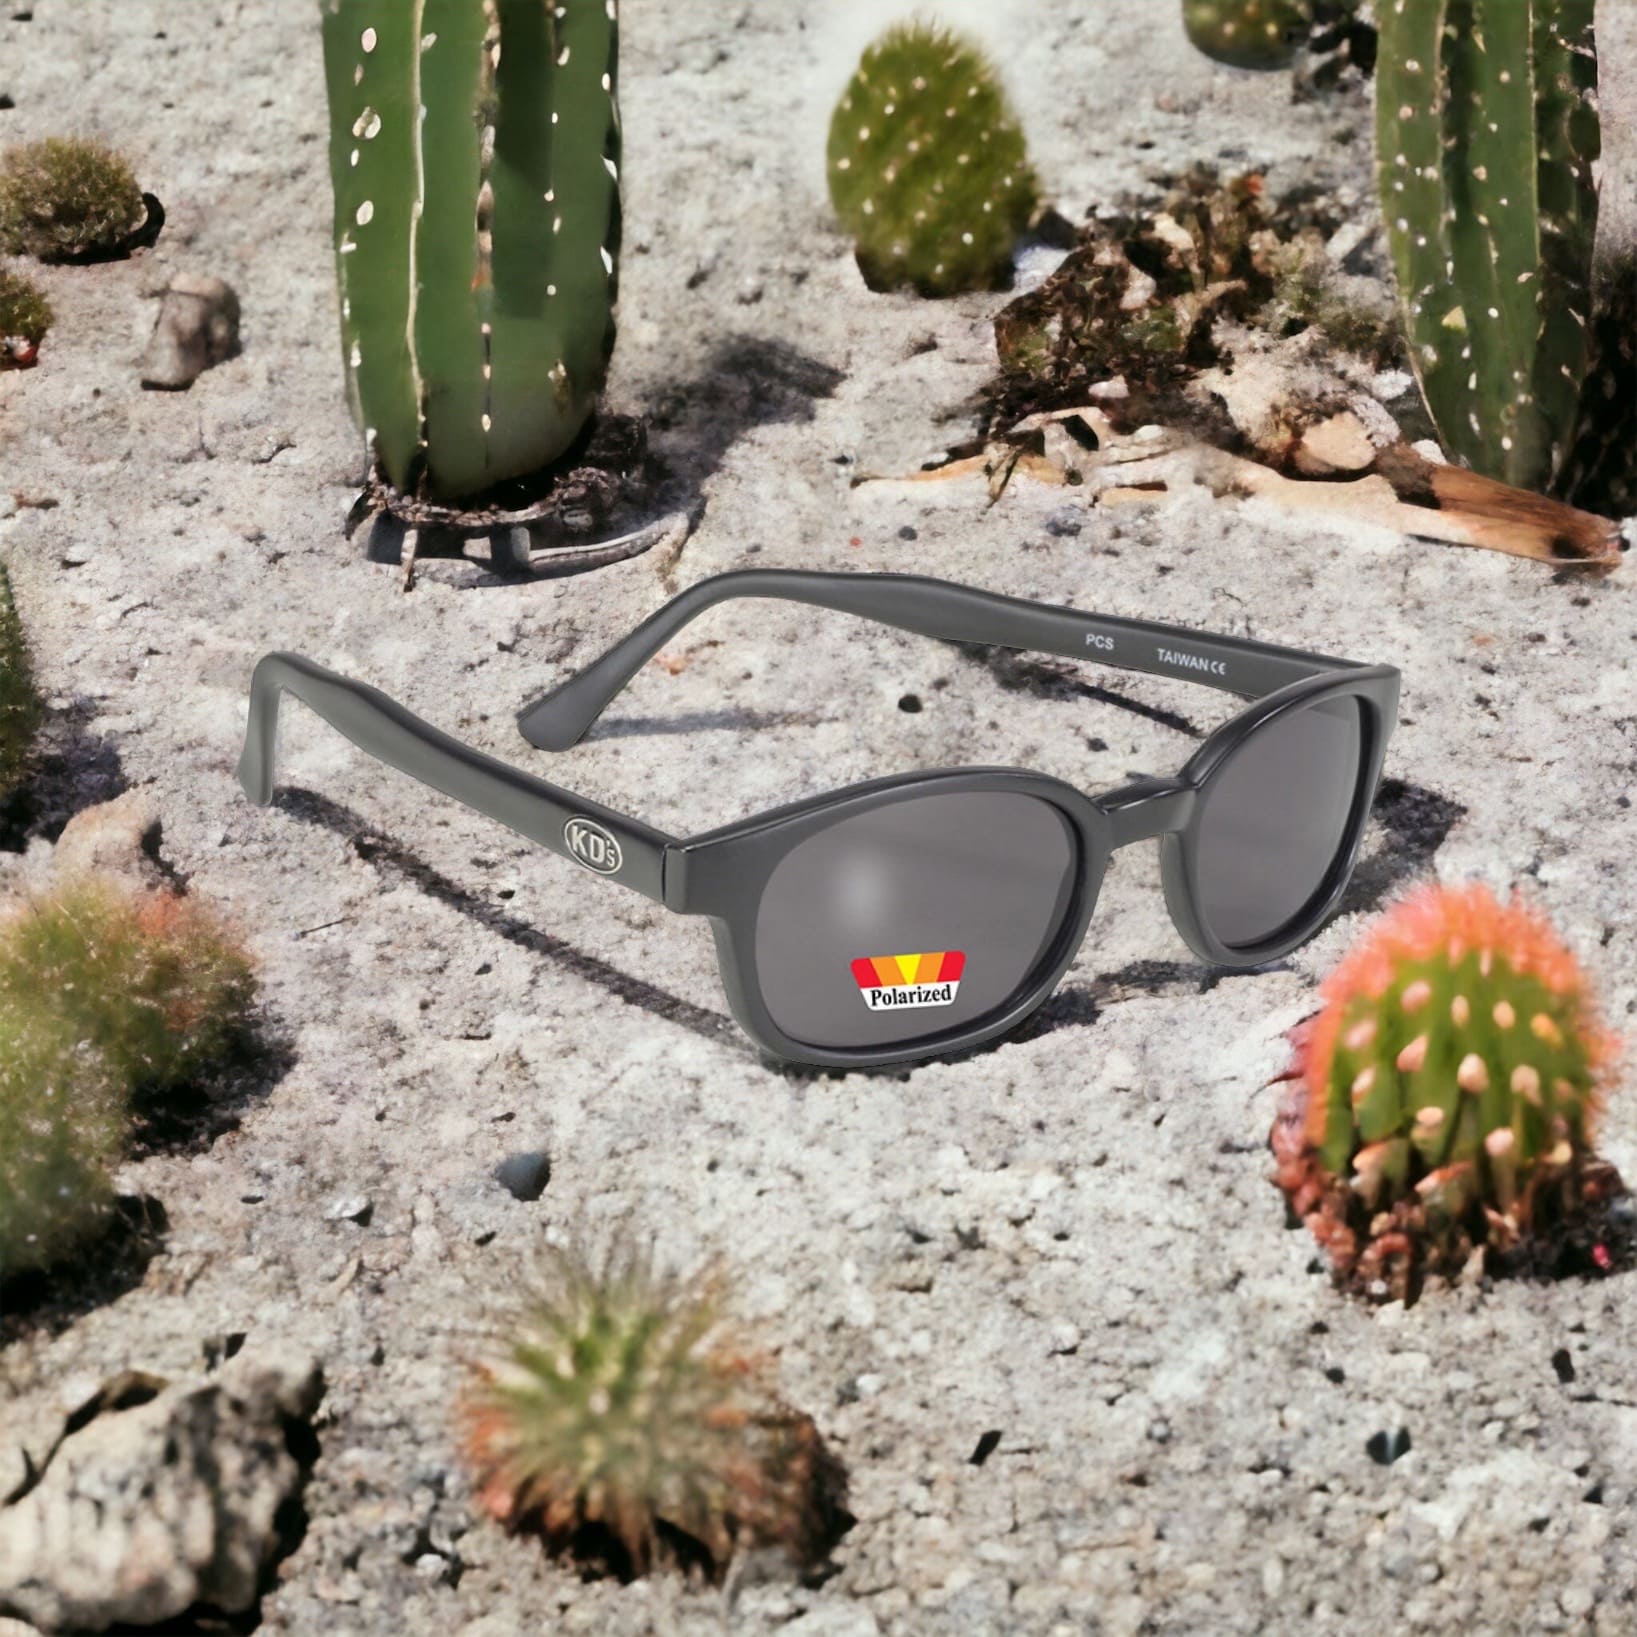 X-KD's 10019 large sunglasses with gray polarized polycarbonate lenses and a matte black frame set in pebbles and cacti in the desert.